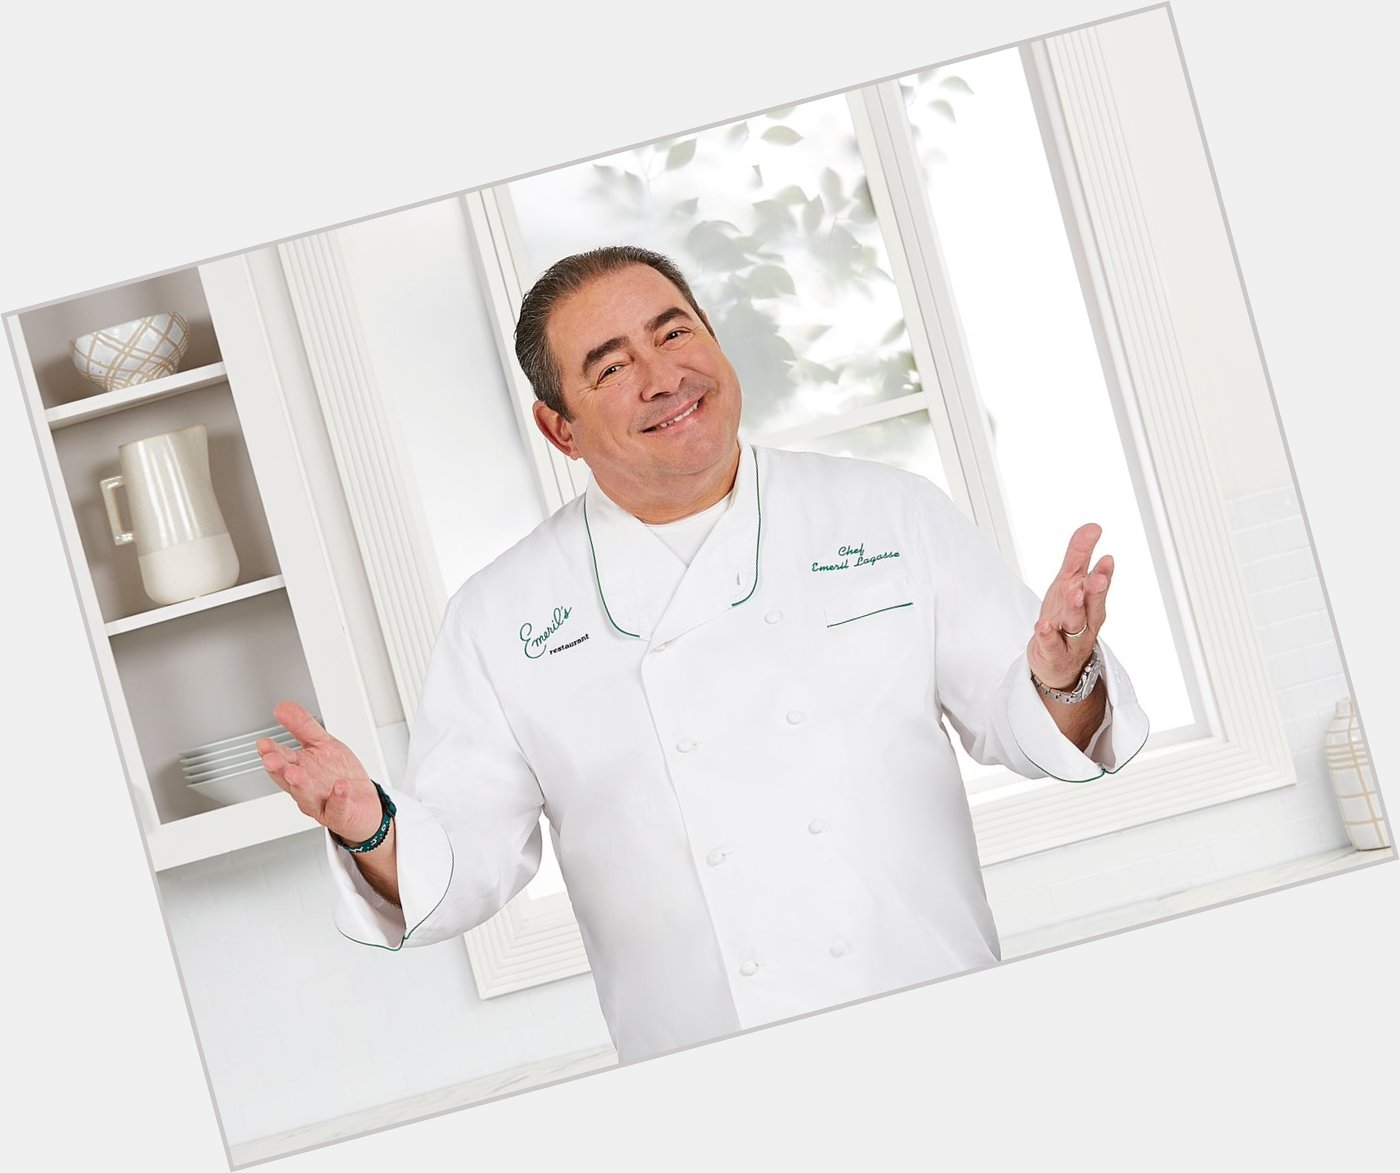 We want to wish our favorite Chef Emeril Lagasse a very Happy Birthday today!  